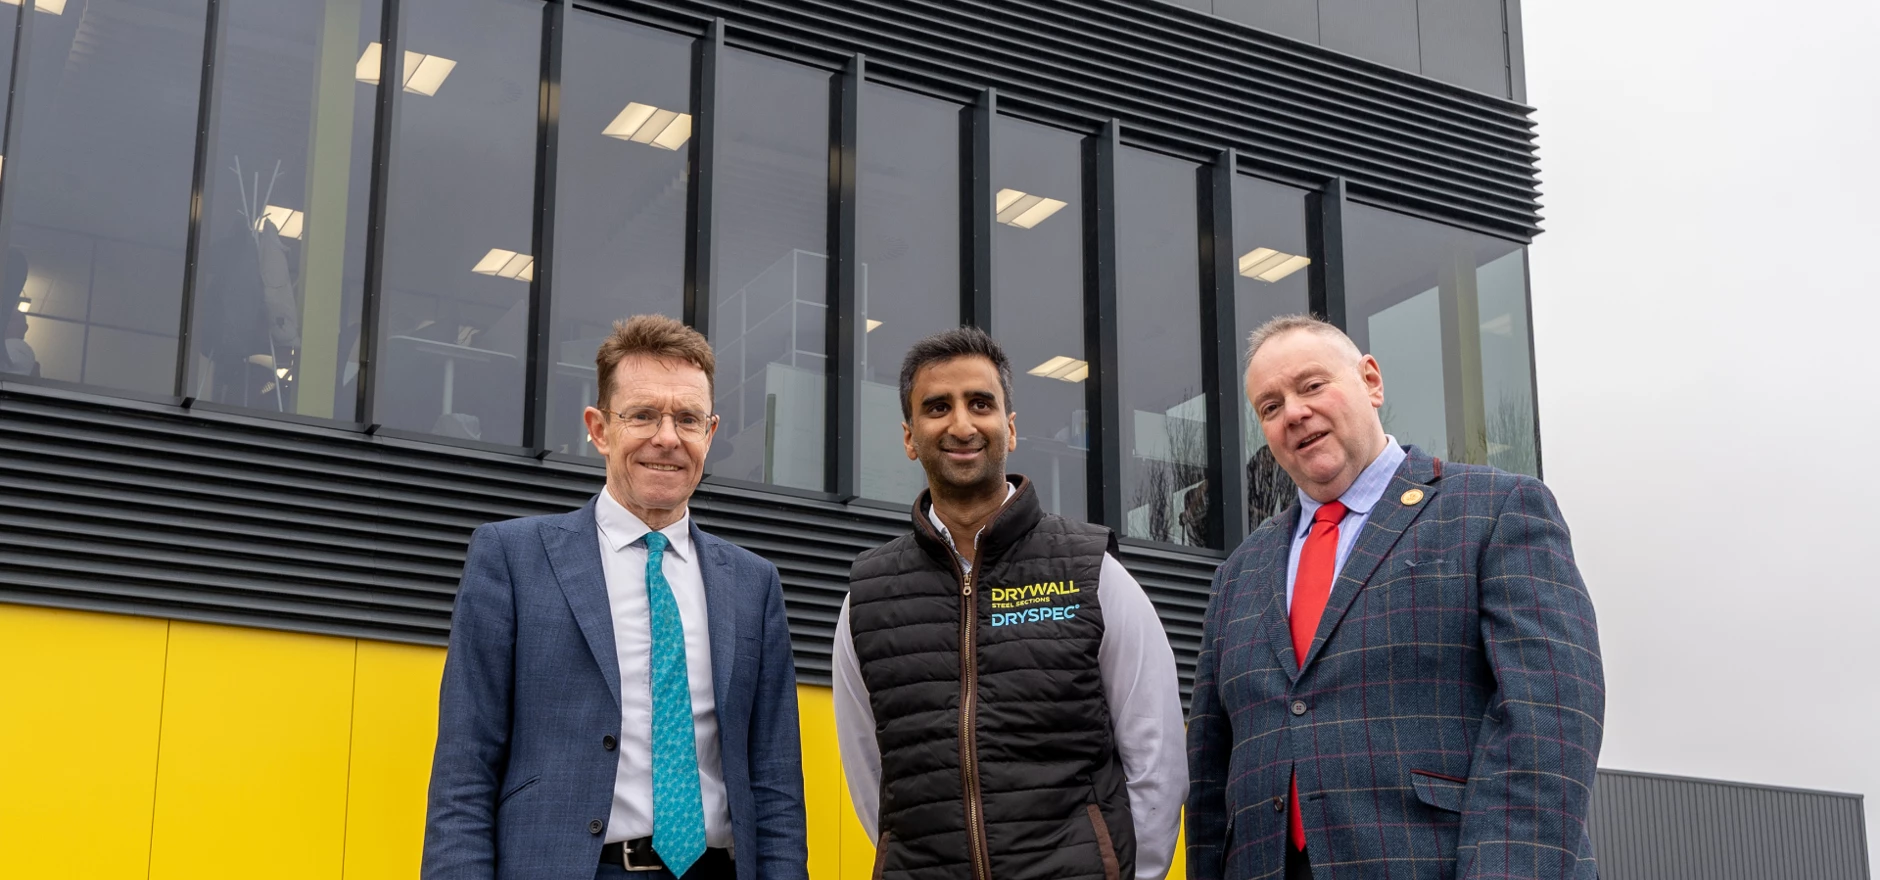 From L-R; Andy Street, Mayor of the West Midlands and Chair of the WMCA; Mayank Gupta, director of DryWall, and Stephen Simkins, Leader of Wolverhampton Council.